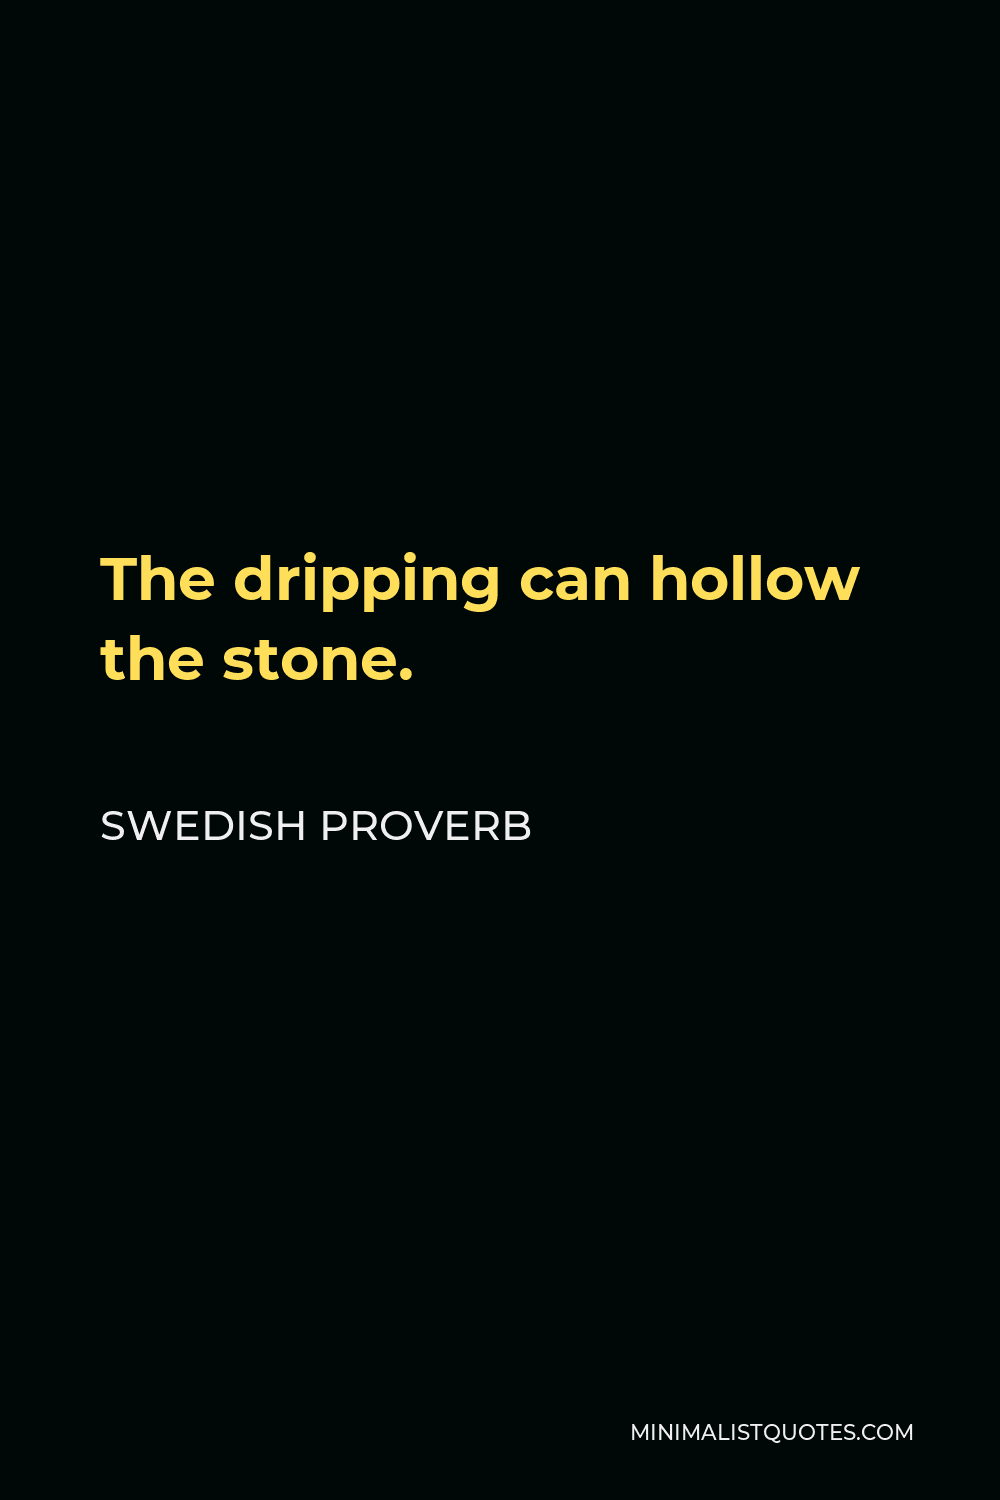 Swedish Proverb Quote - The dripping can hollow the stone.